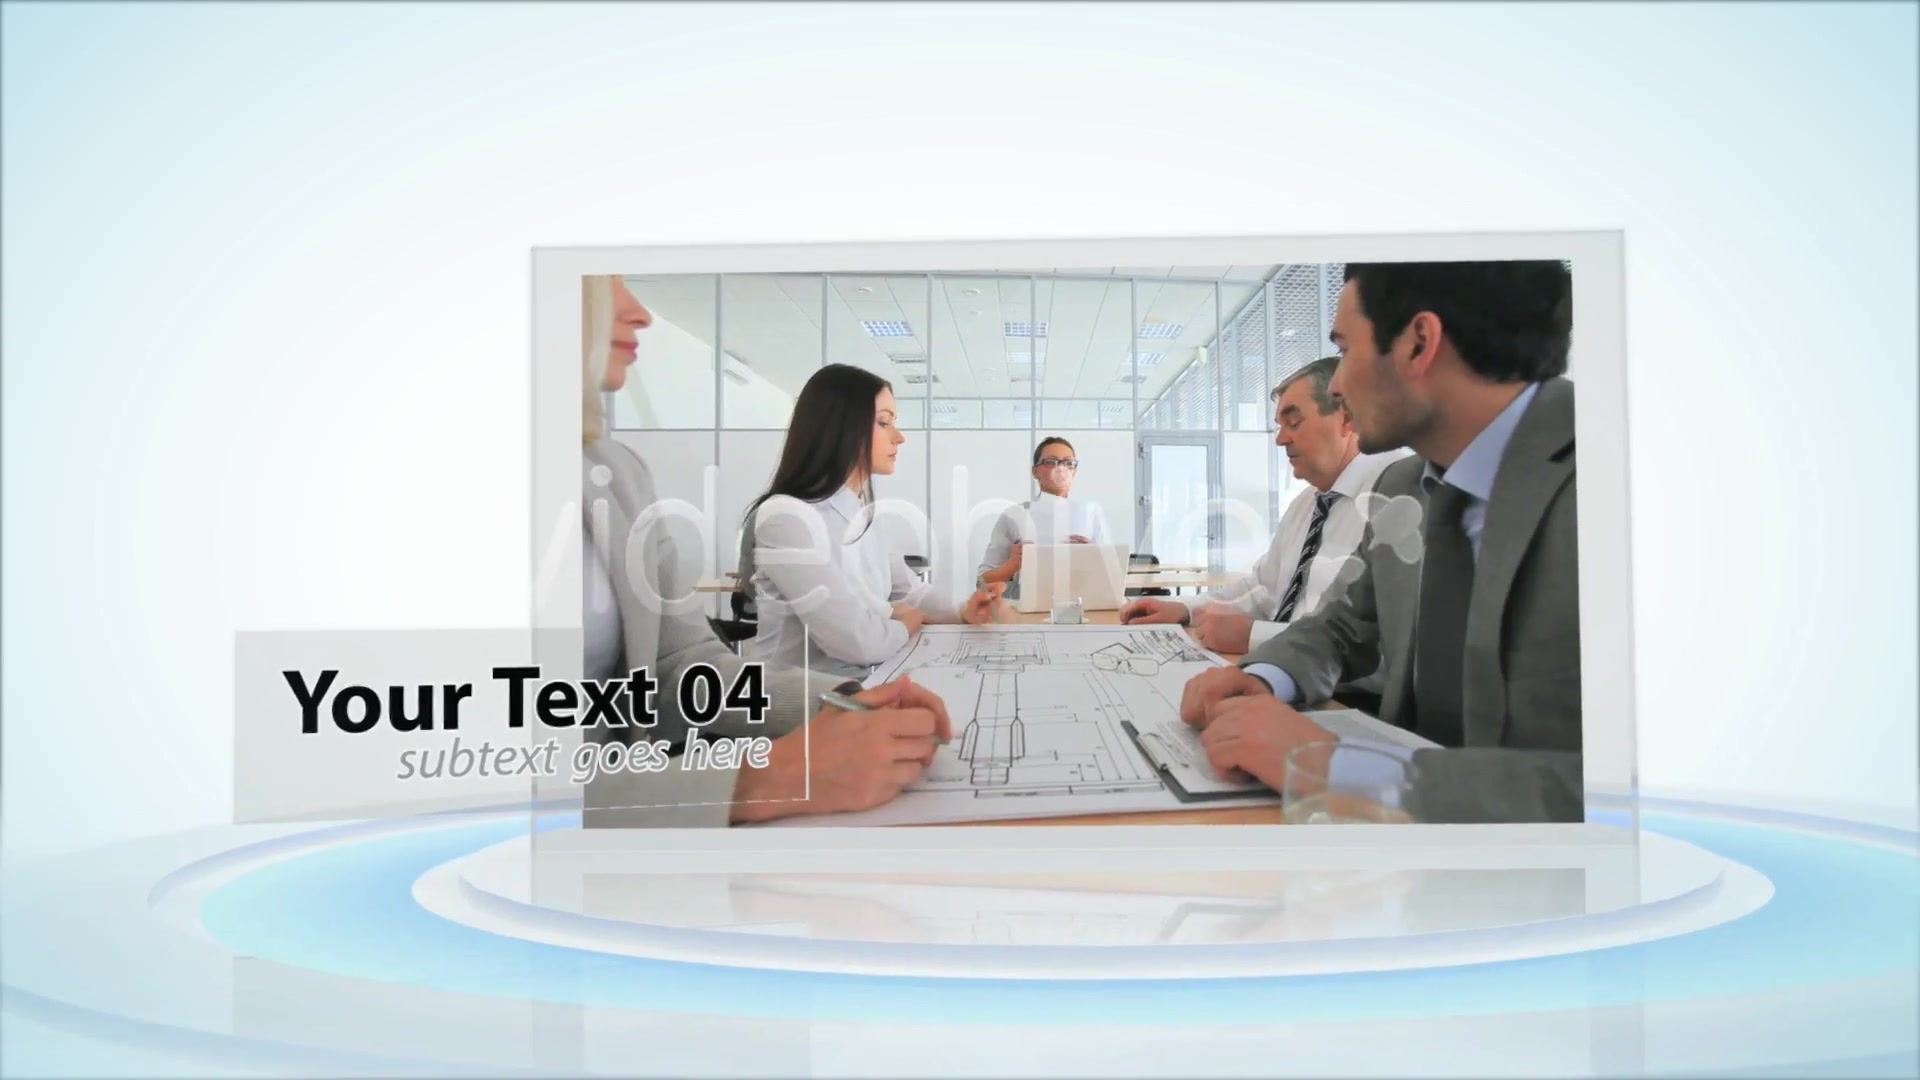 Corporate Glass Display - Download Videohive 4112125